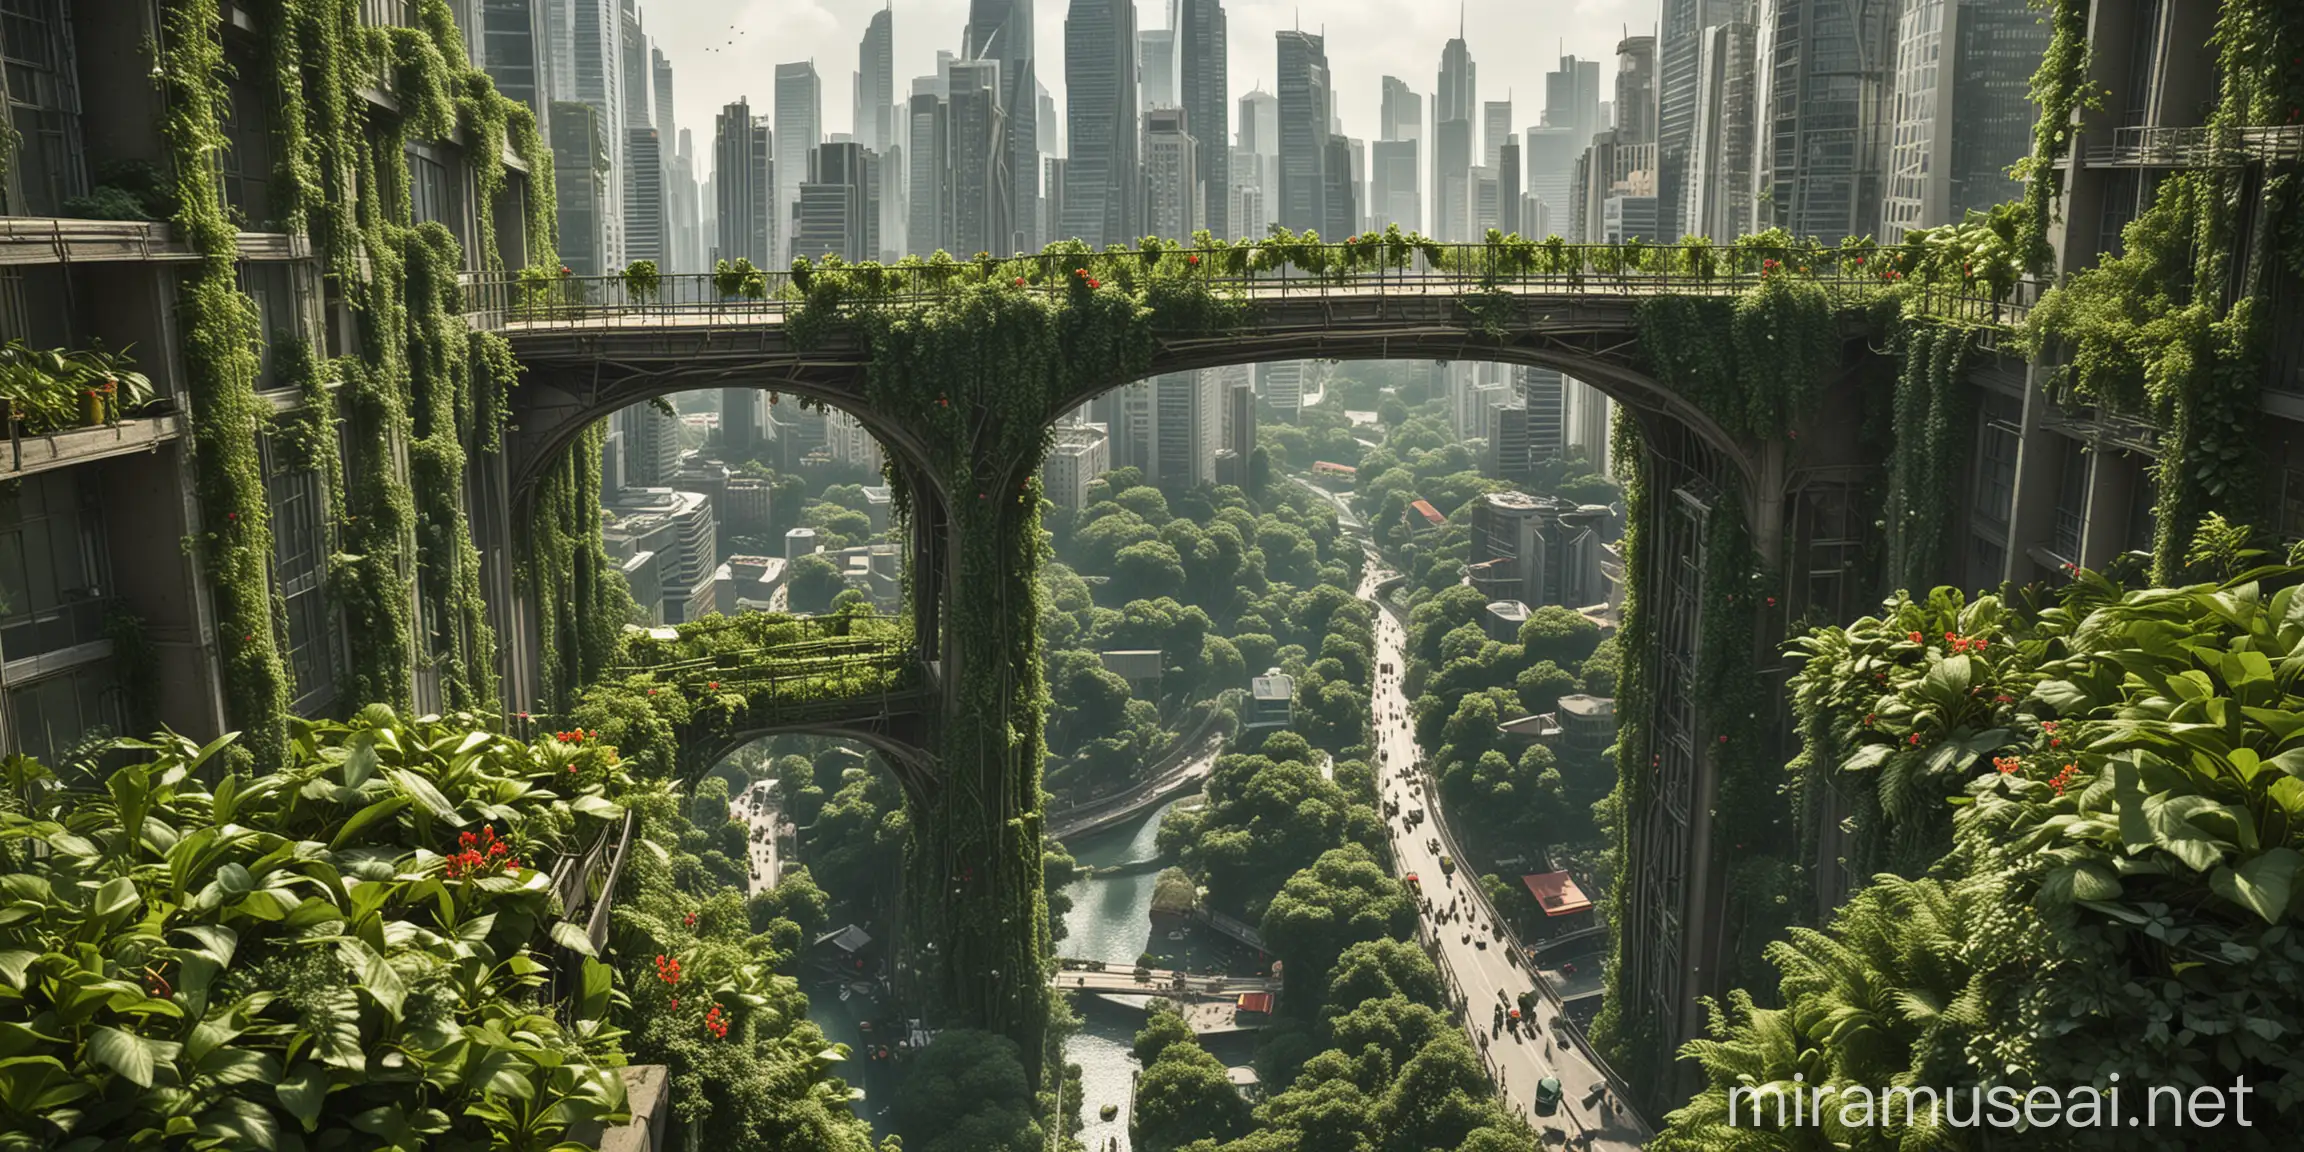 Create an ant's eye view of a city of skyscrapers, each adorned with lush terrace gardens. The buildings are interconnected by a vast network of bridges, all covered with climbing plants. The scene should depict a pleasant and beautiful green landscape, showcasing the harmonious blend of nature and urban architecture.